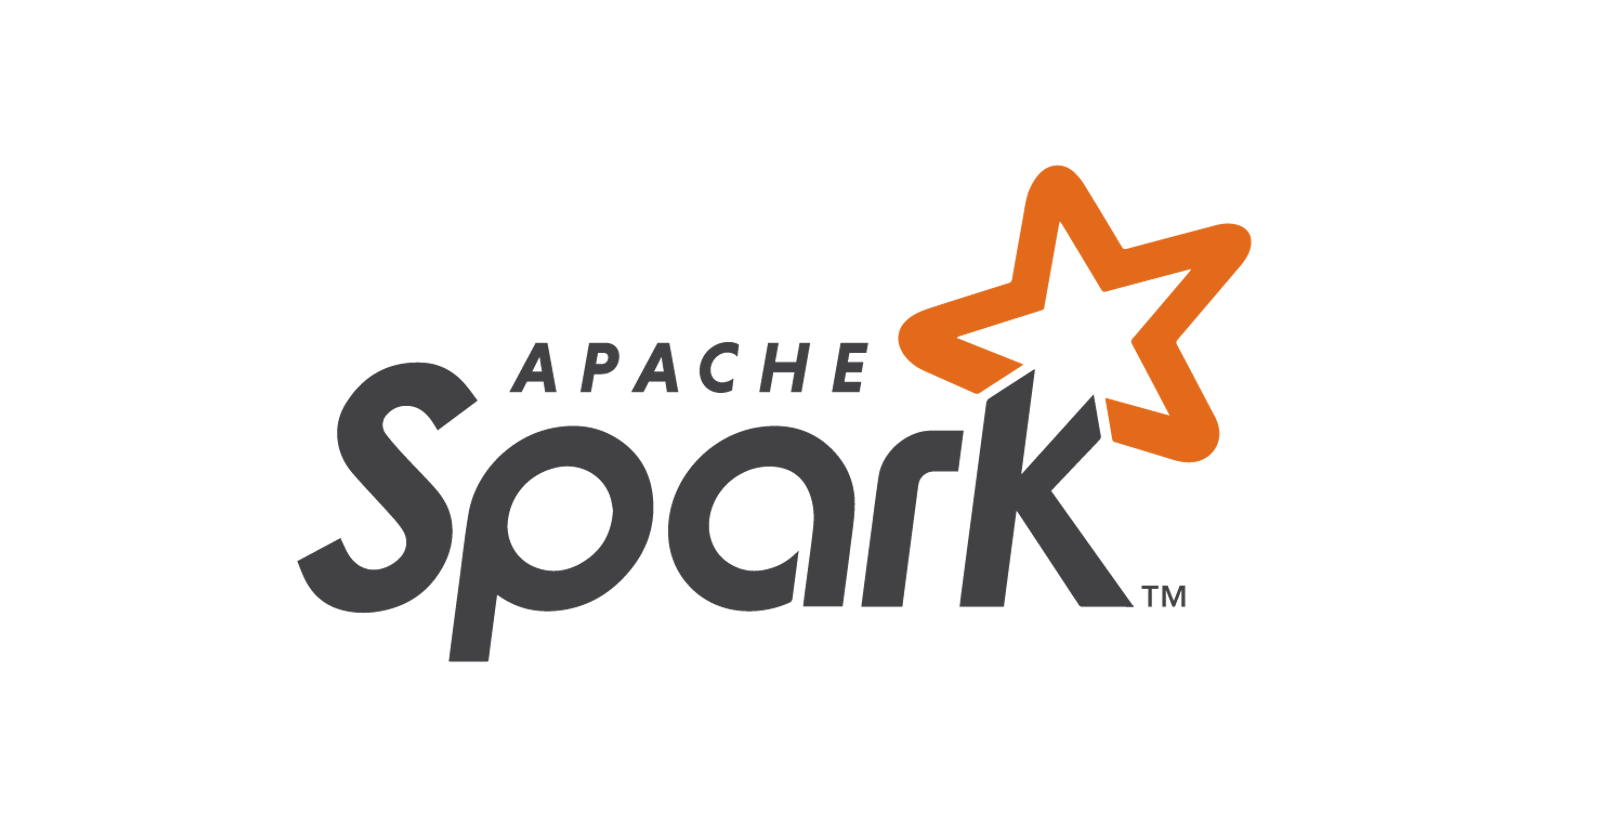 Common source file formats used with  Apache Spark